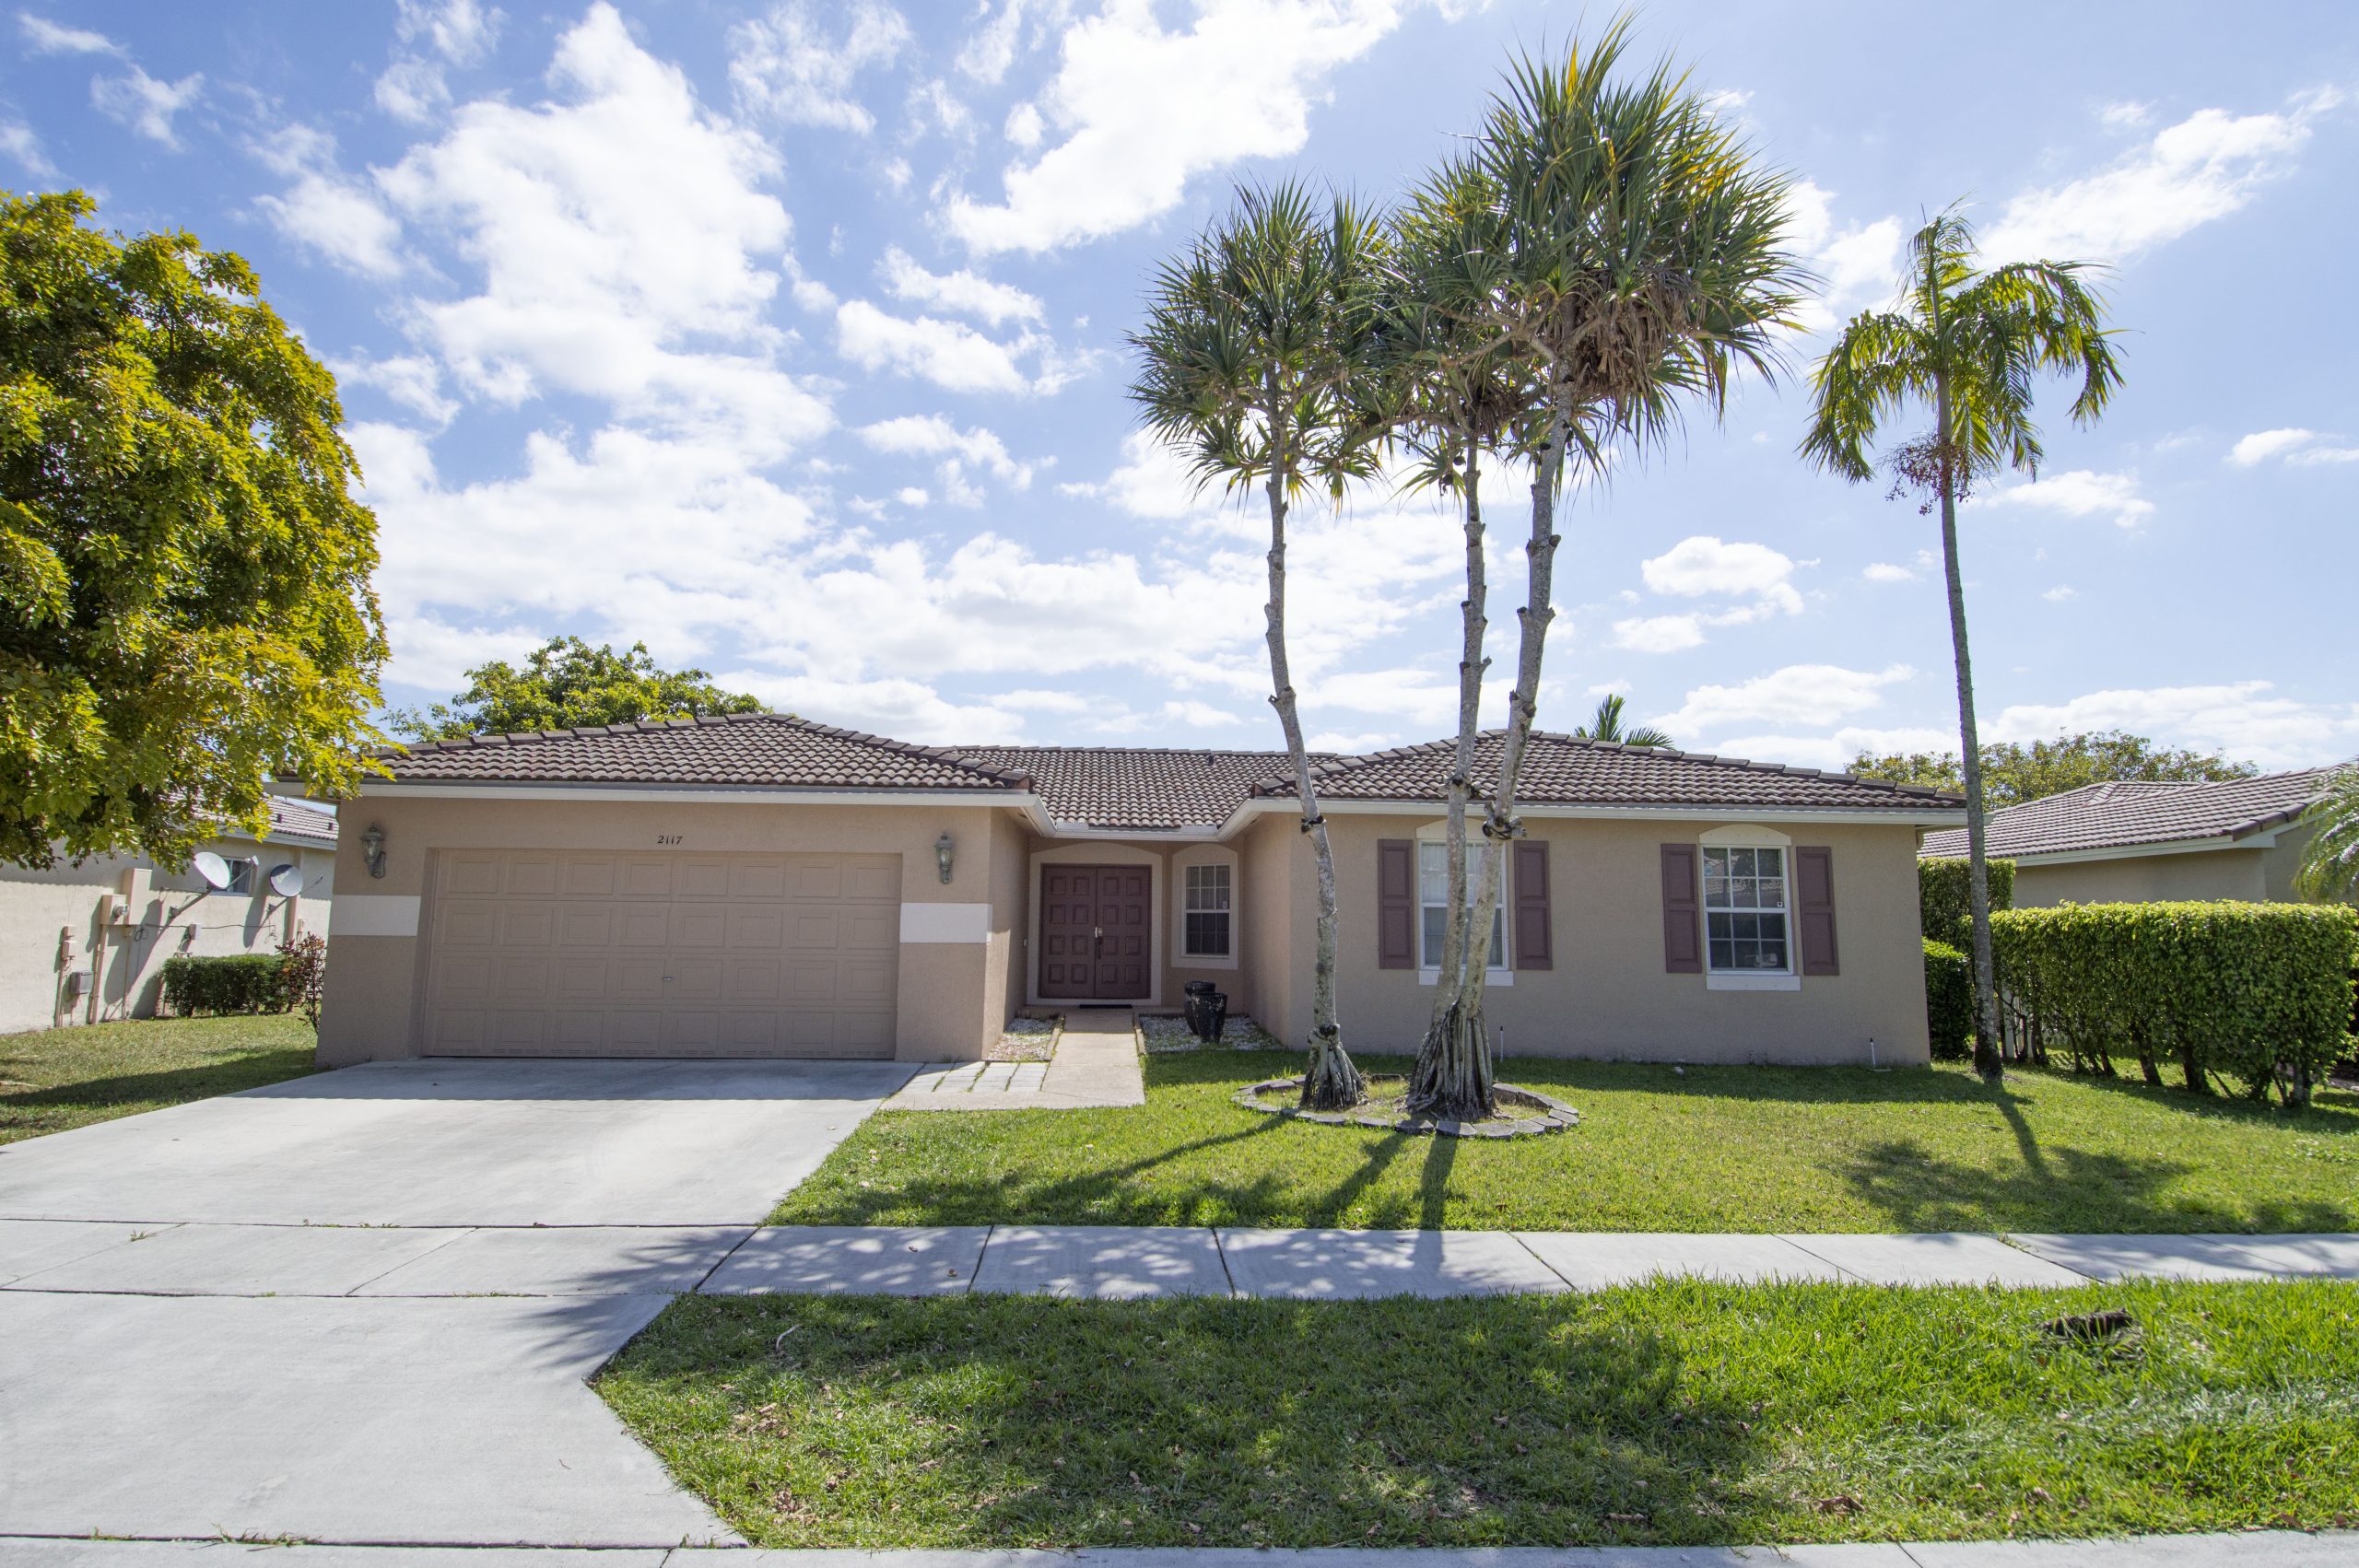 House Front for 2117 SW 119th Ave, Miramar, FL 33025 - © Flat Fee Florida Realty